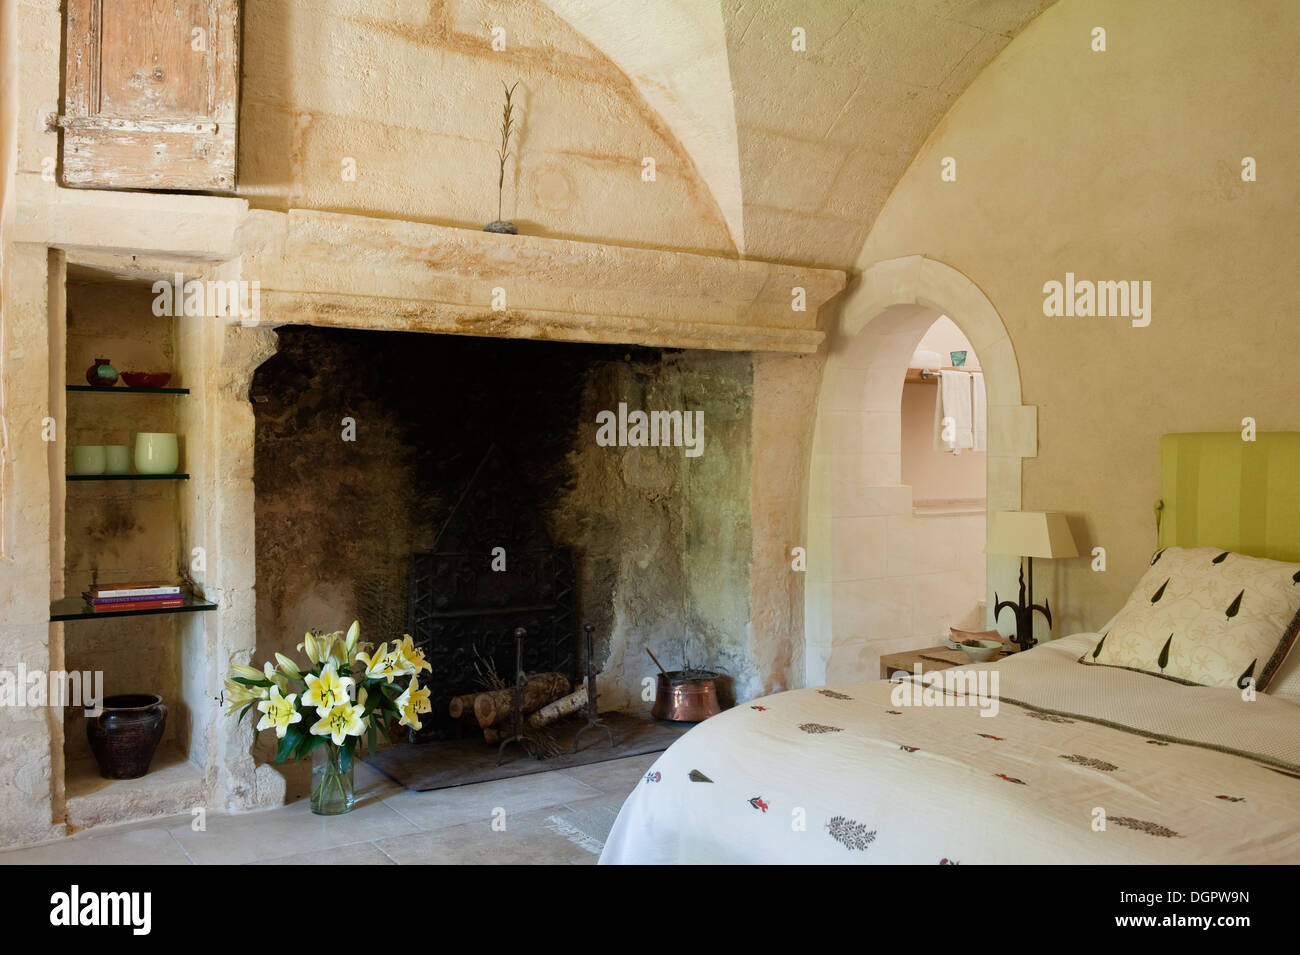 Open Stone Fireplace With Decorative Vase Of Lilies In A